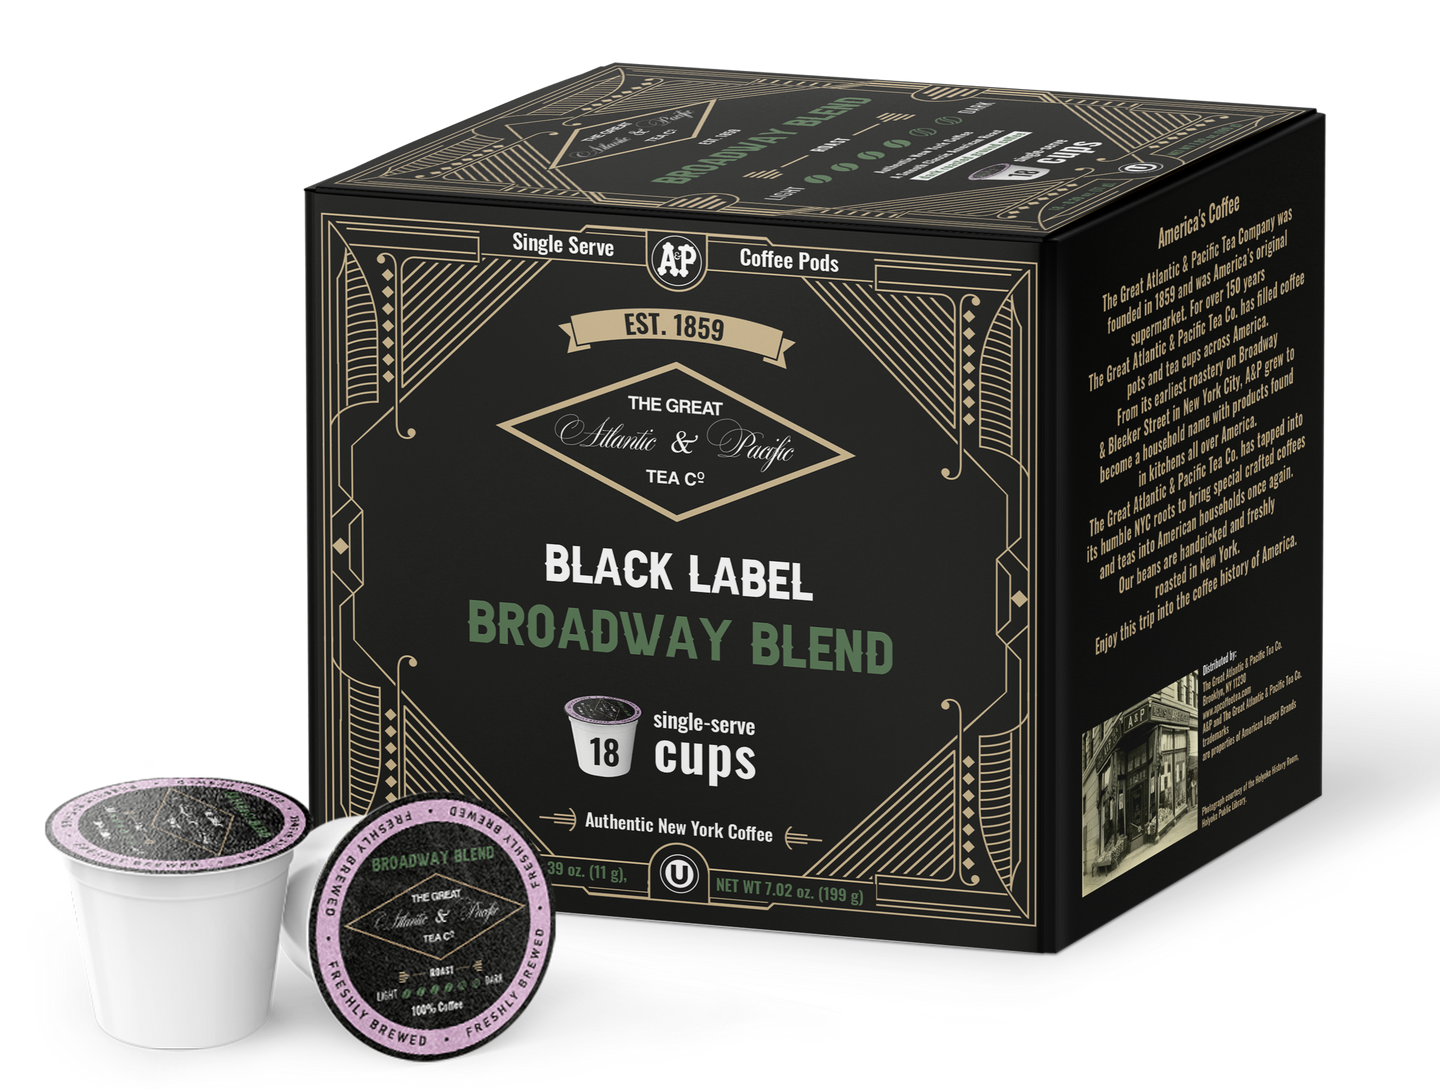 A&P Broadway Blend Single Serve Coffee Pods, 18 Count